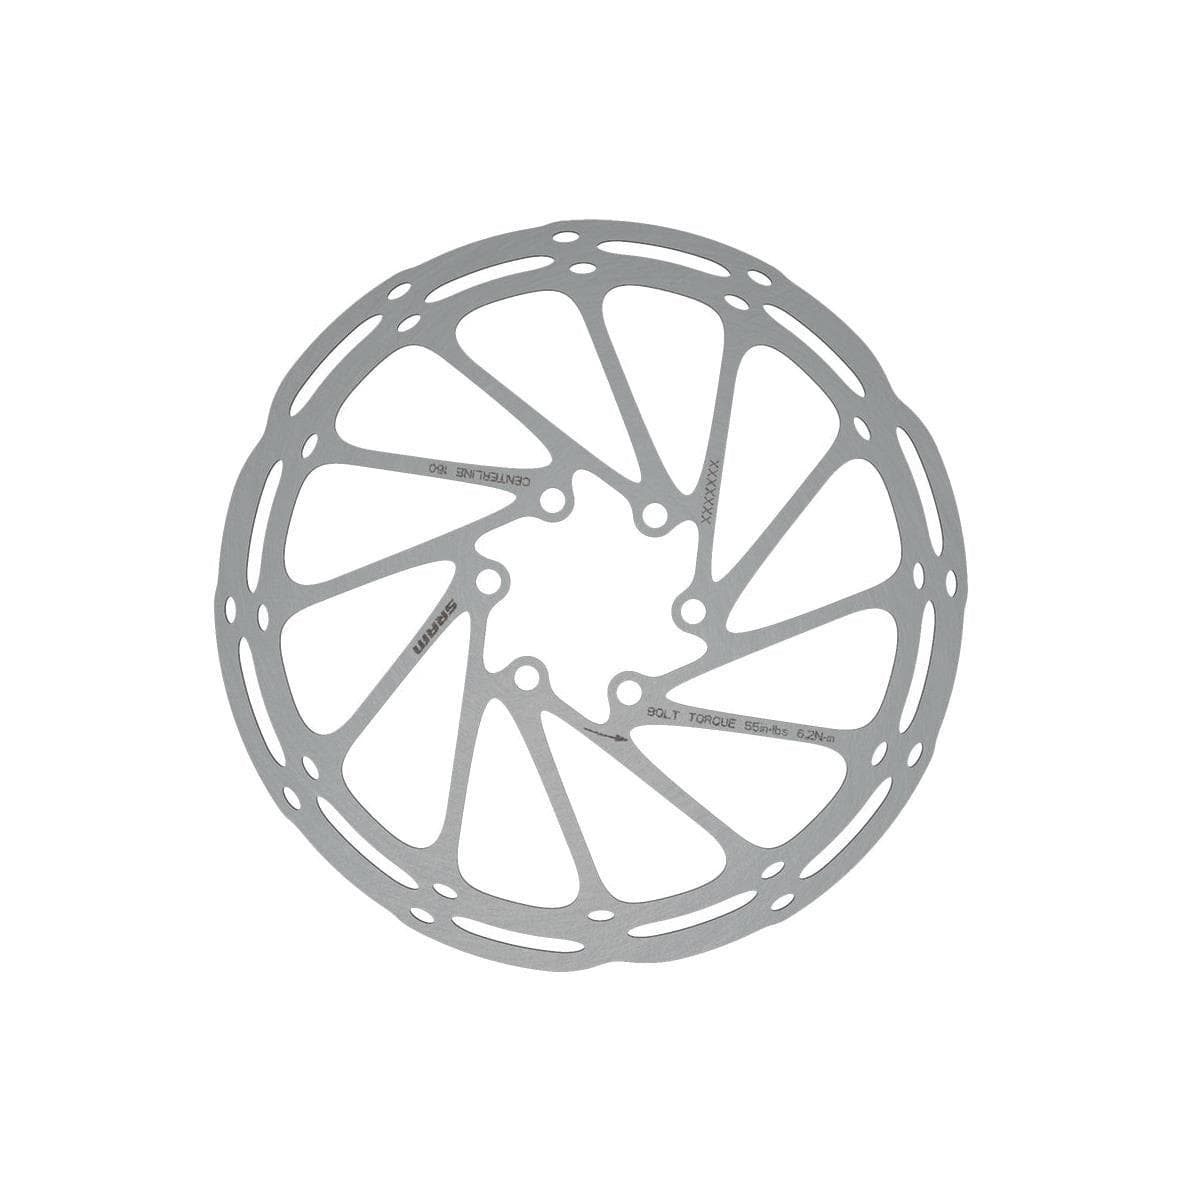 Sram Rotor - Centerline Rounded (Includes Steel Rotor Bolts):  140Mm